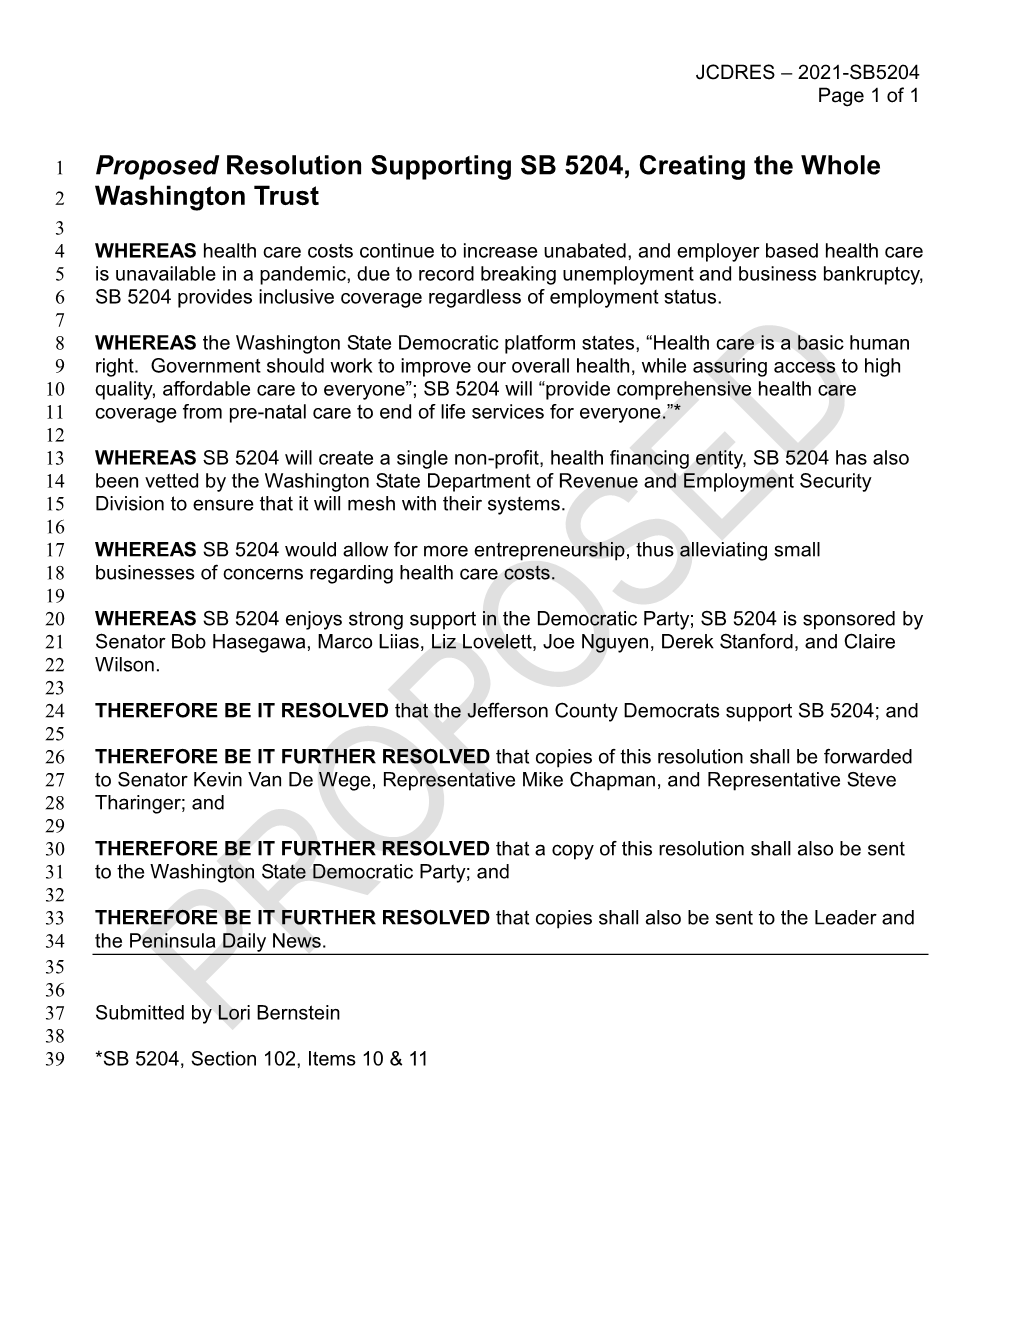 Proposed Resolution Supporting SB 5204, Creating the Whole